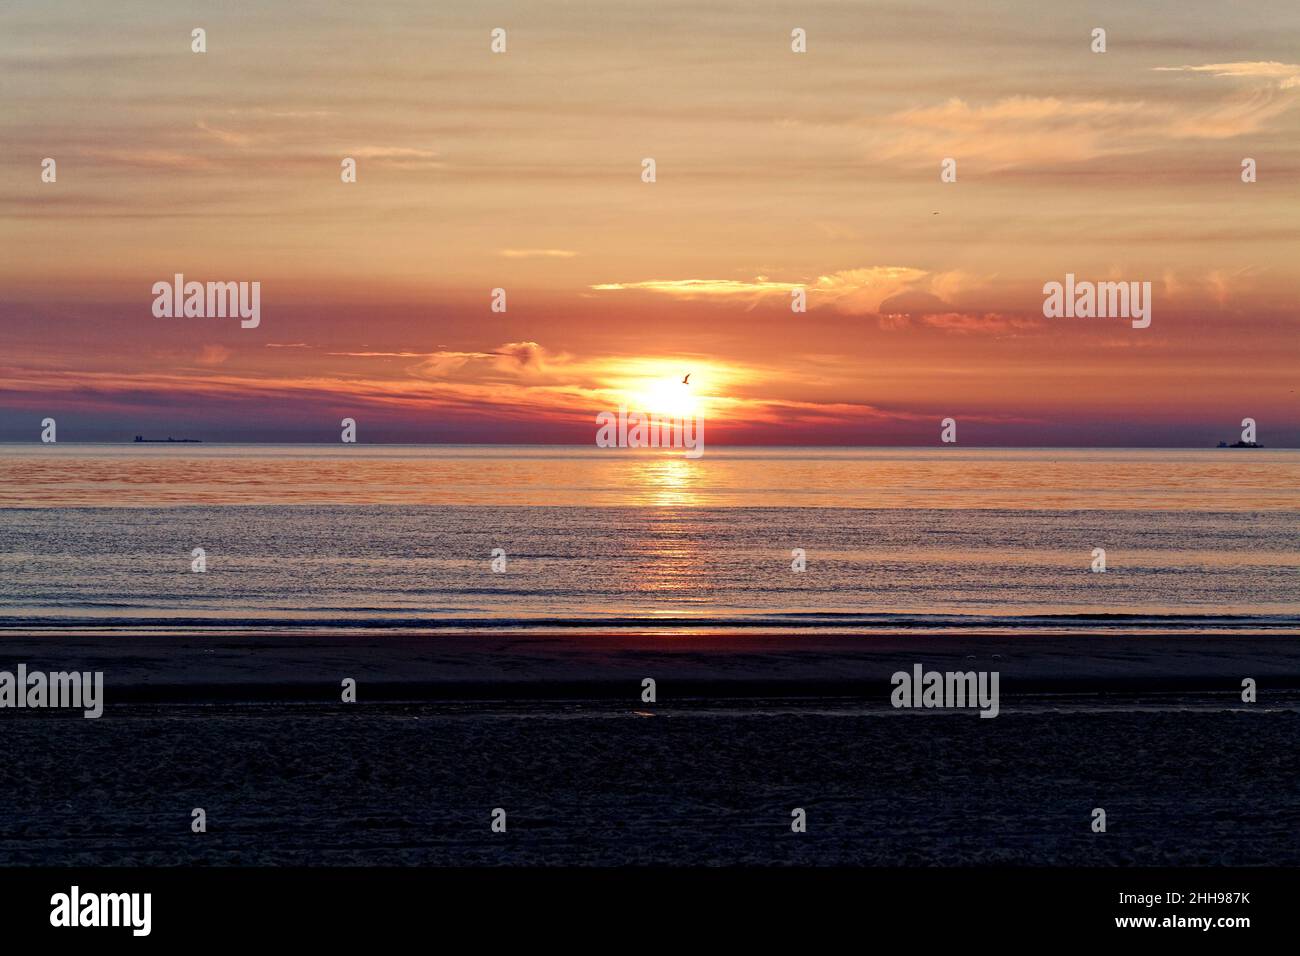 Amazing sunset landscape in the North Sea. Texel, Netherlands Stock Photo